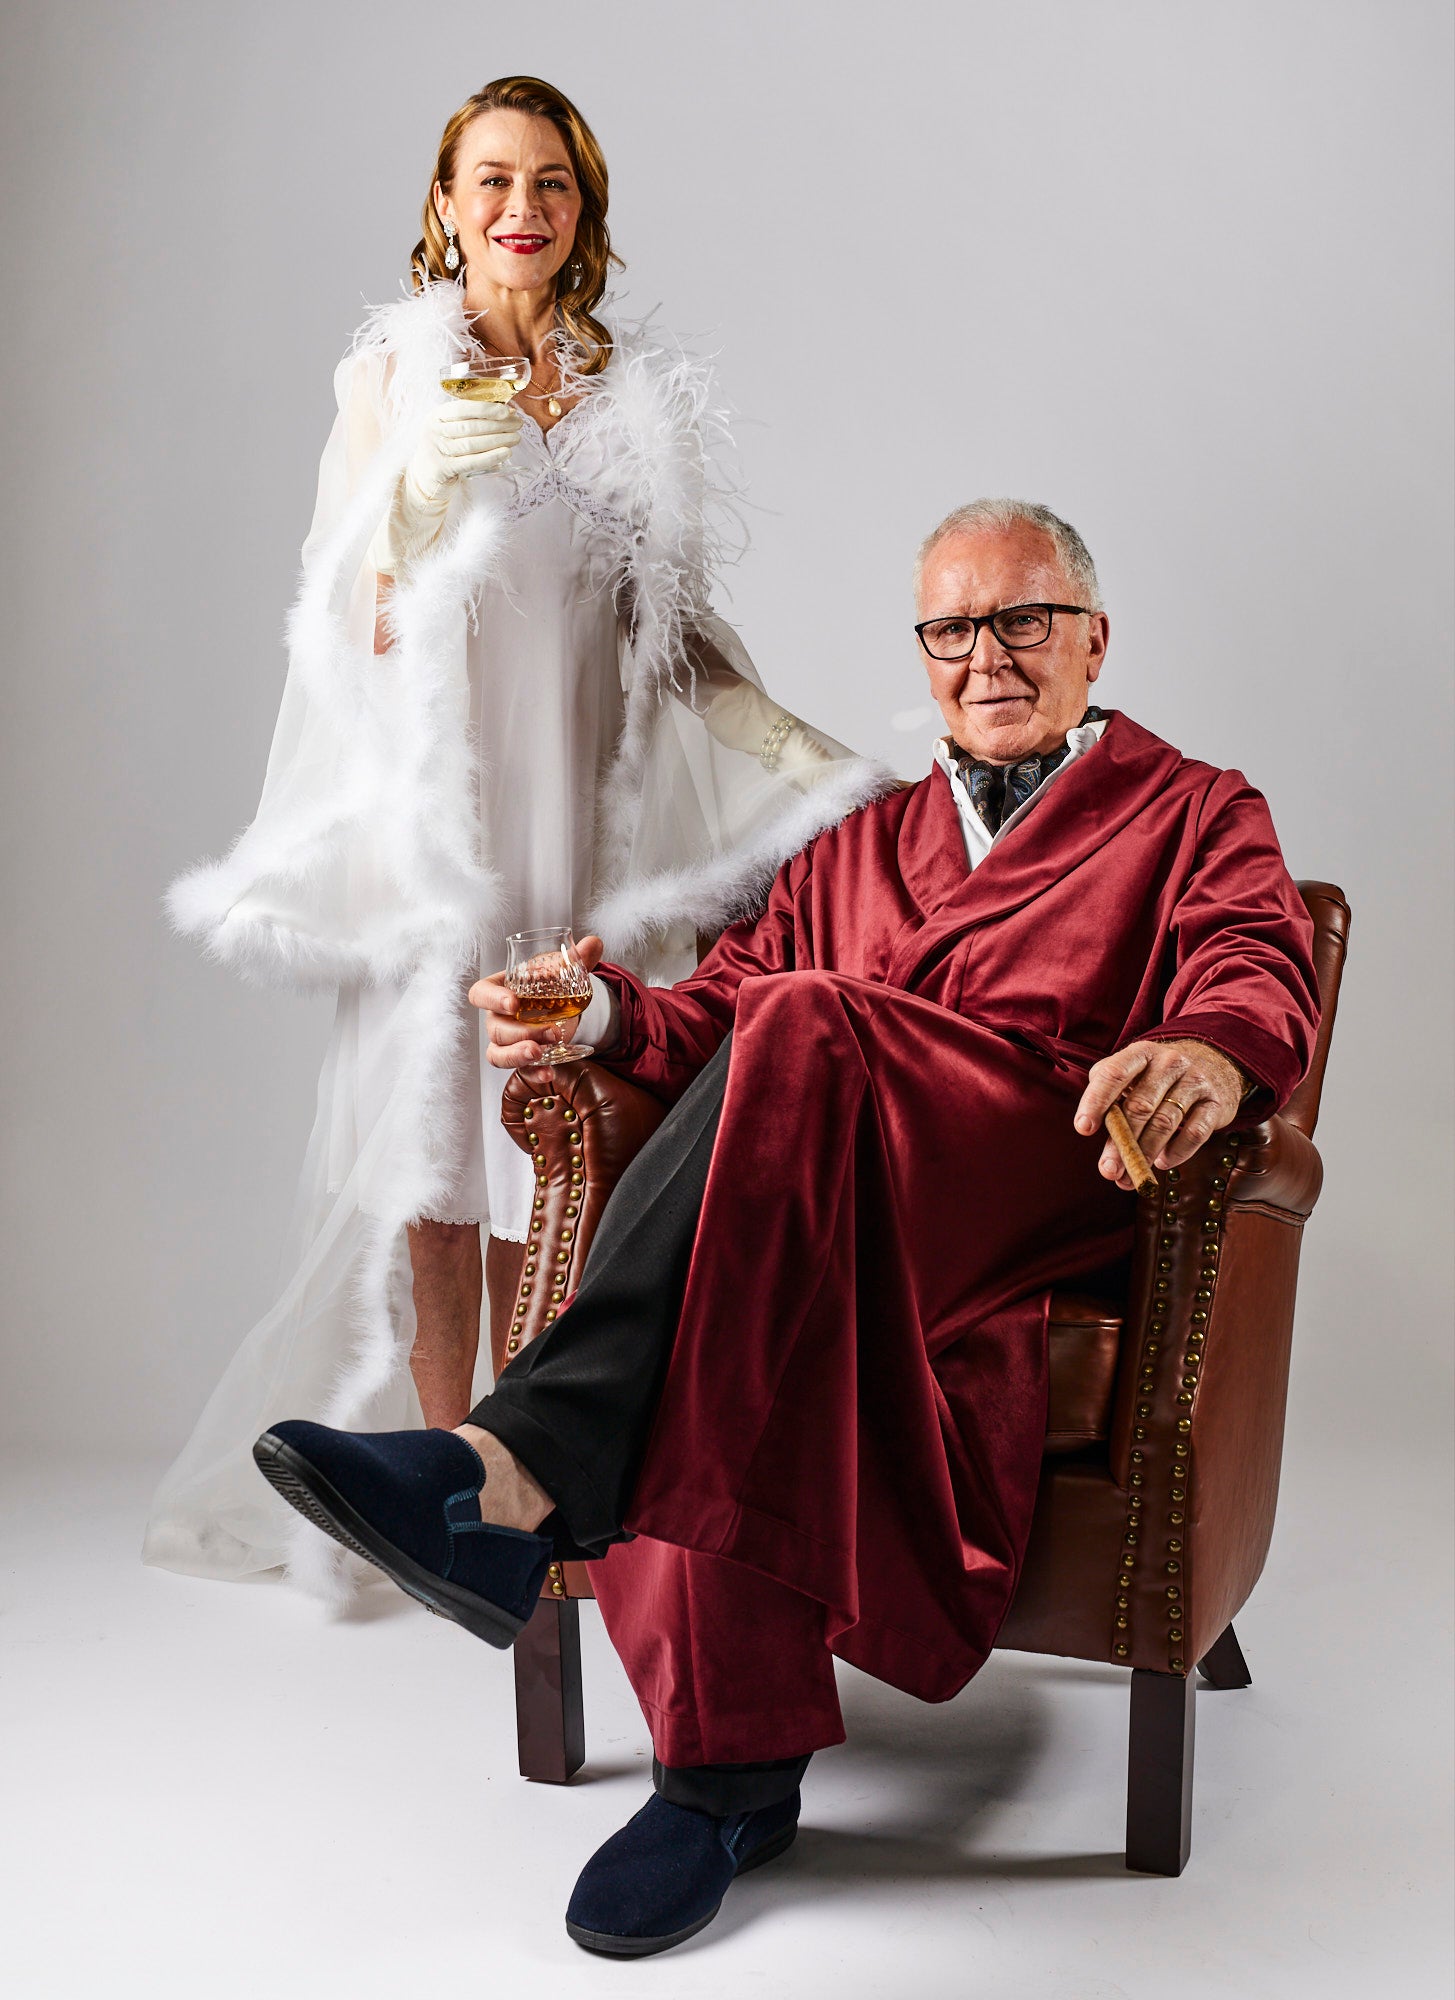 Woman wearing a White Silk Robe and man wearing a Red Silk Robe from Melbourne video production company Enamoured Iris